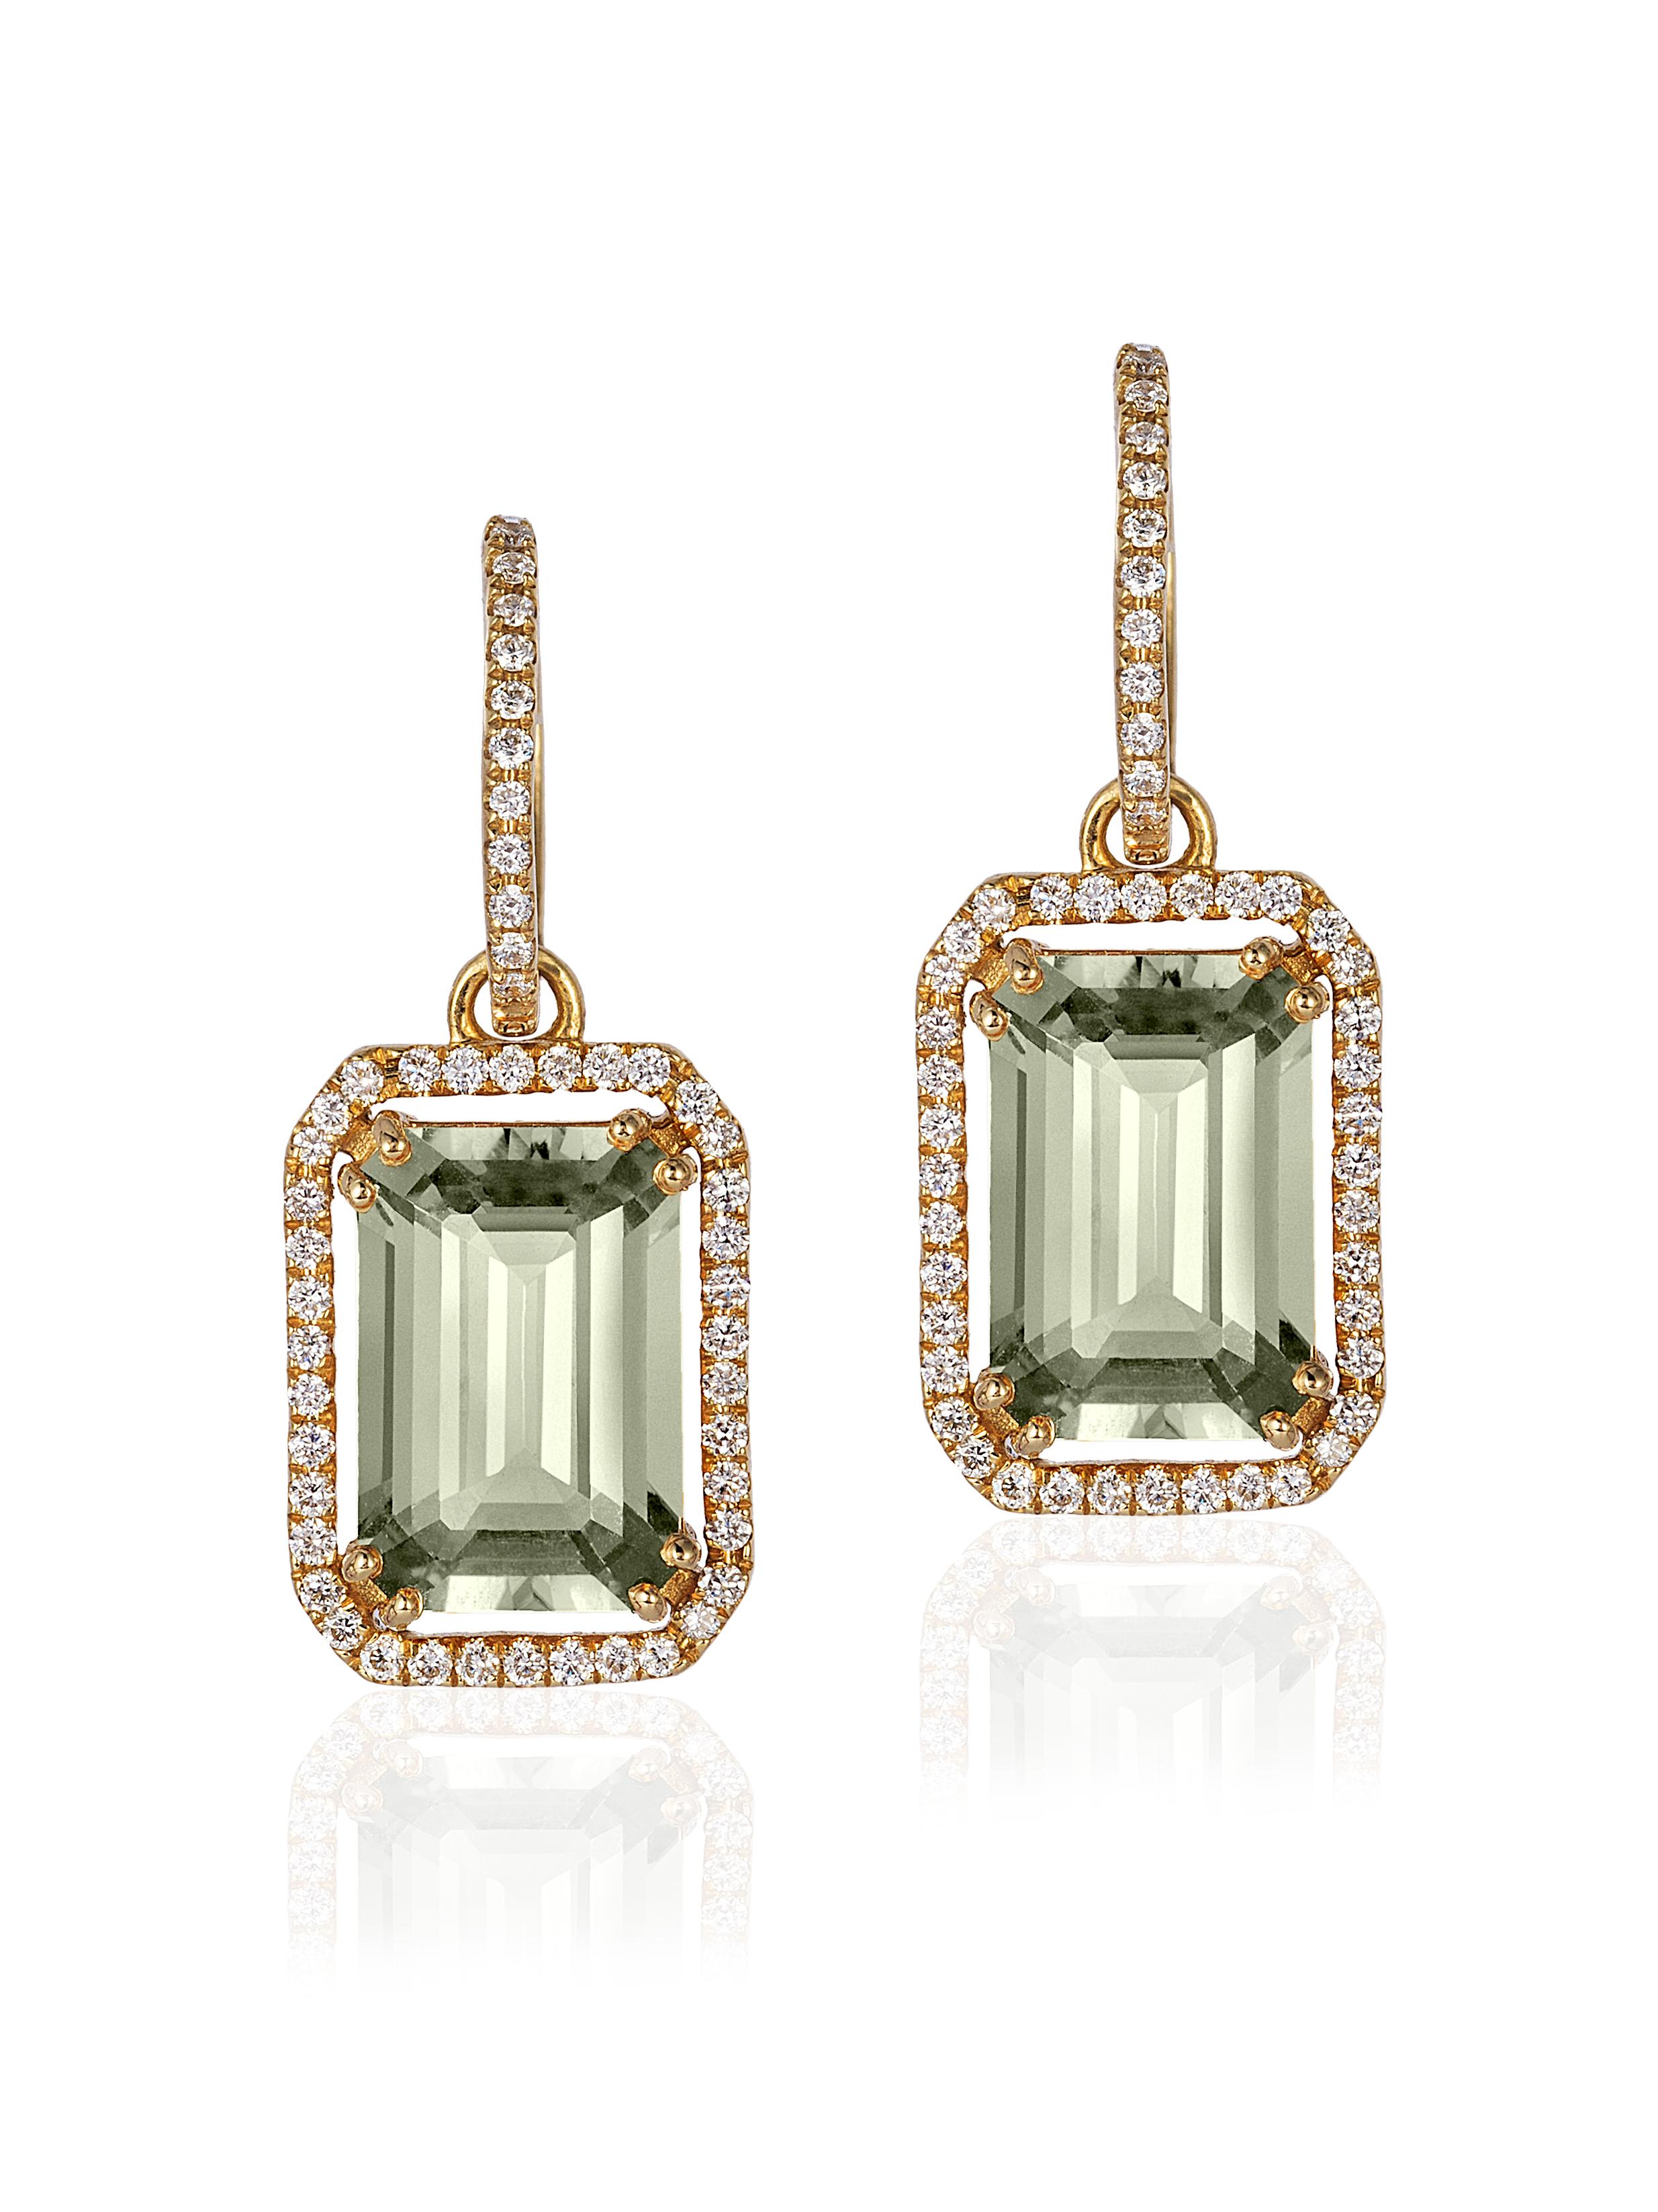 Contemporary Goshwara Emerald Cut with Diamonds Earrings For Sale